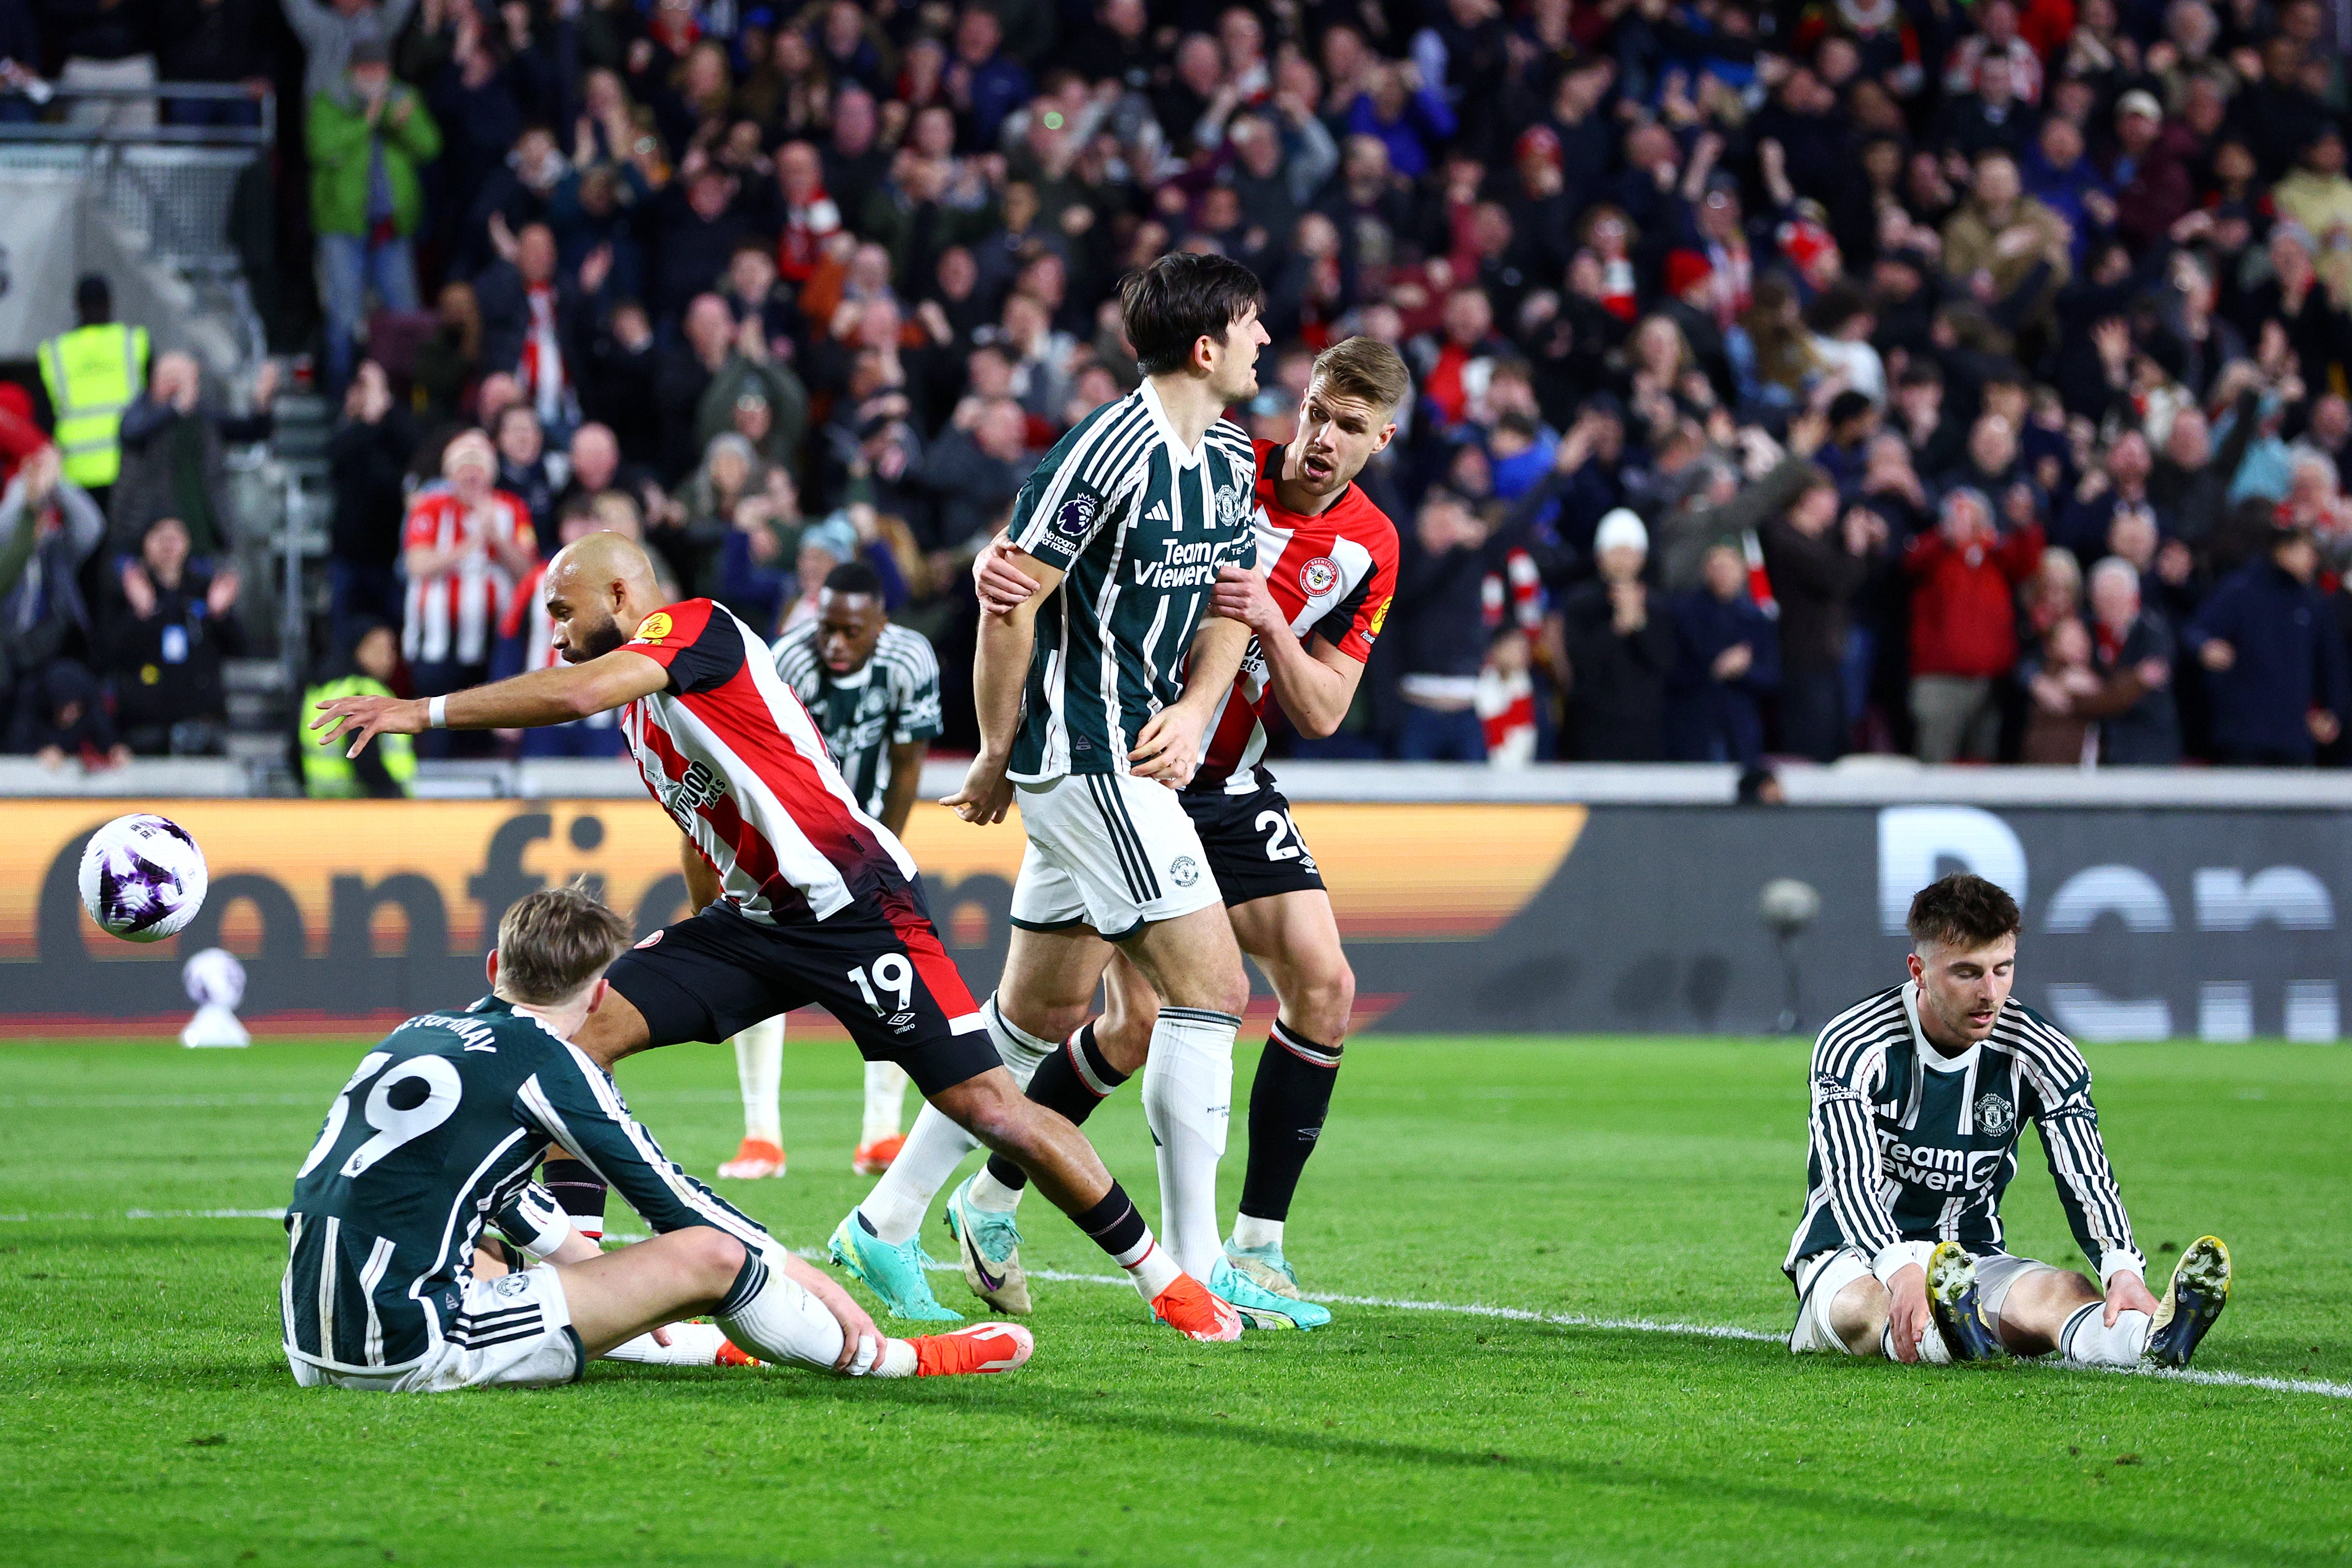 Brentford scored late to snatch a draw from a wild game